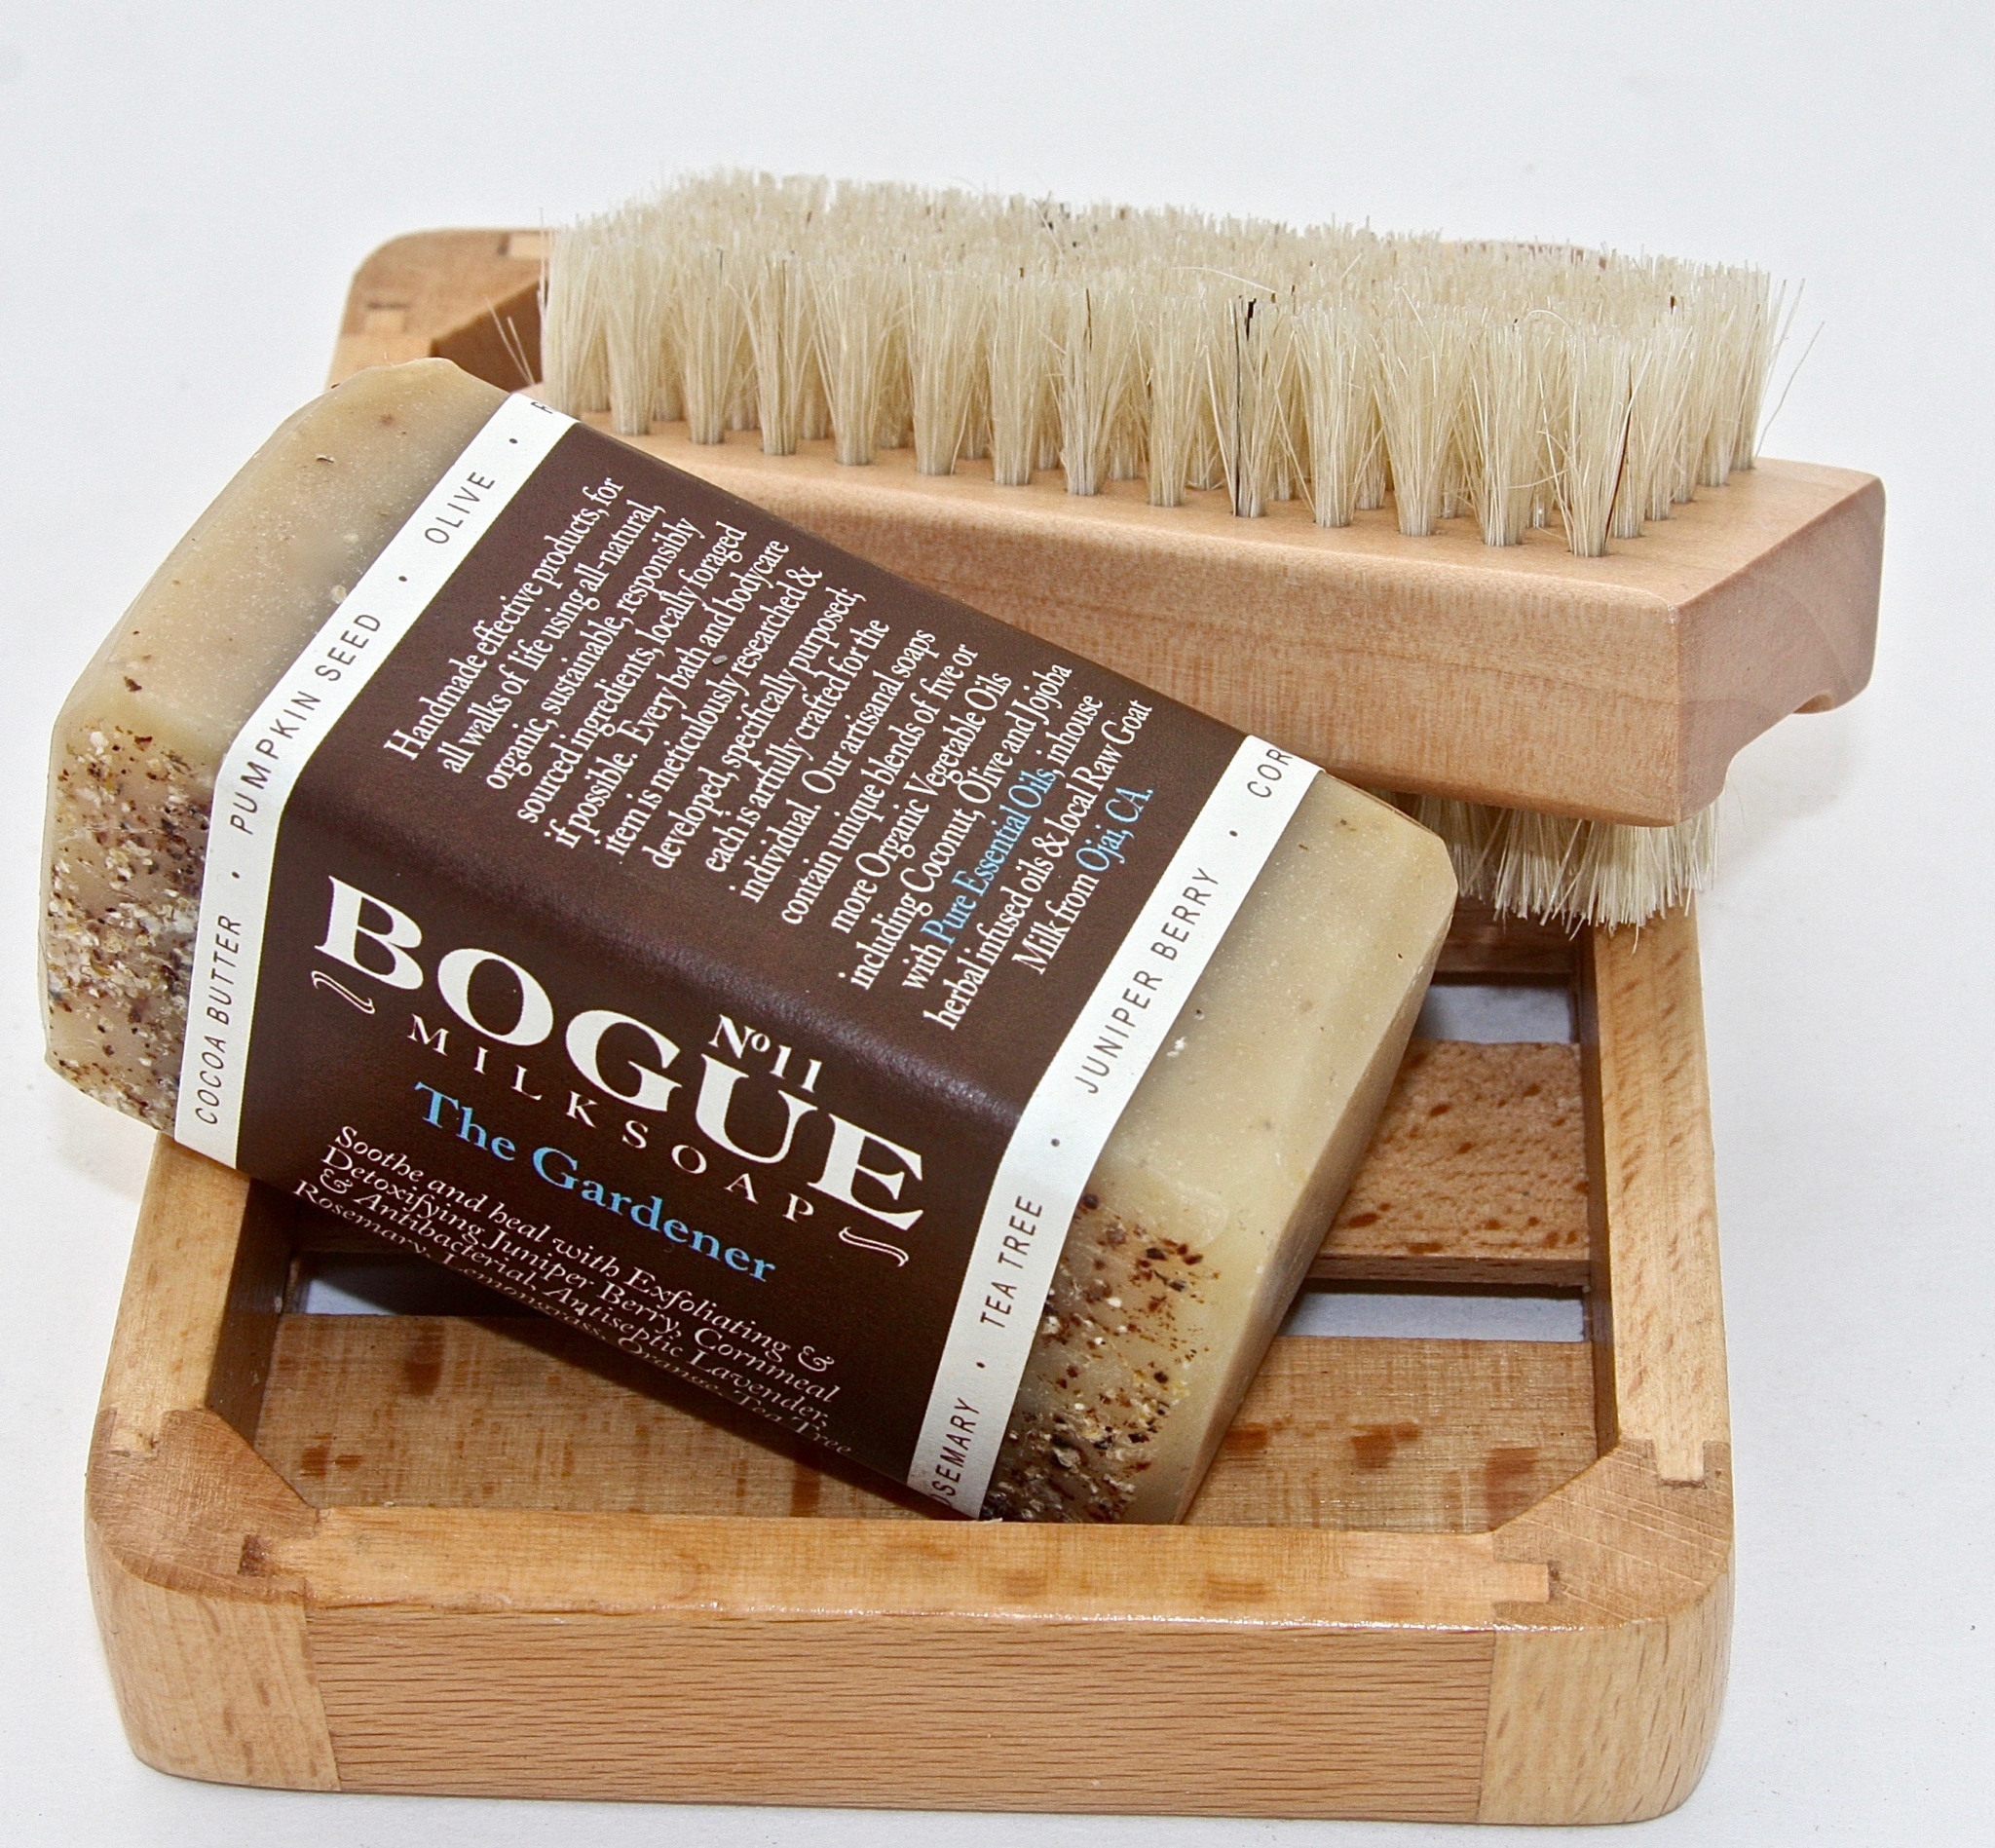 https://www.boguemilksoap.com/wp-content/uploads/2016/11/No.11_Garners-giftset-with-scrubber-scaled.jpg